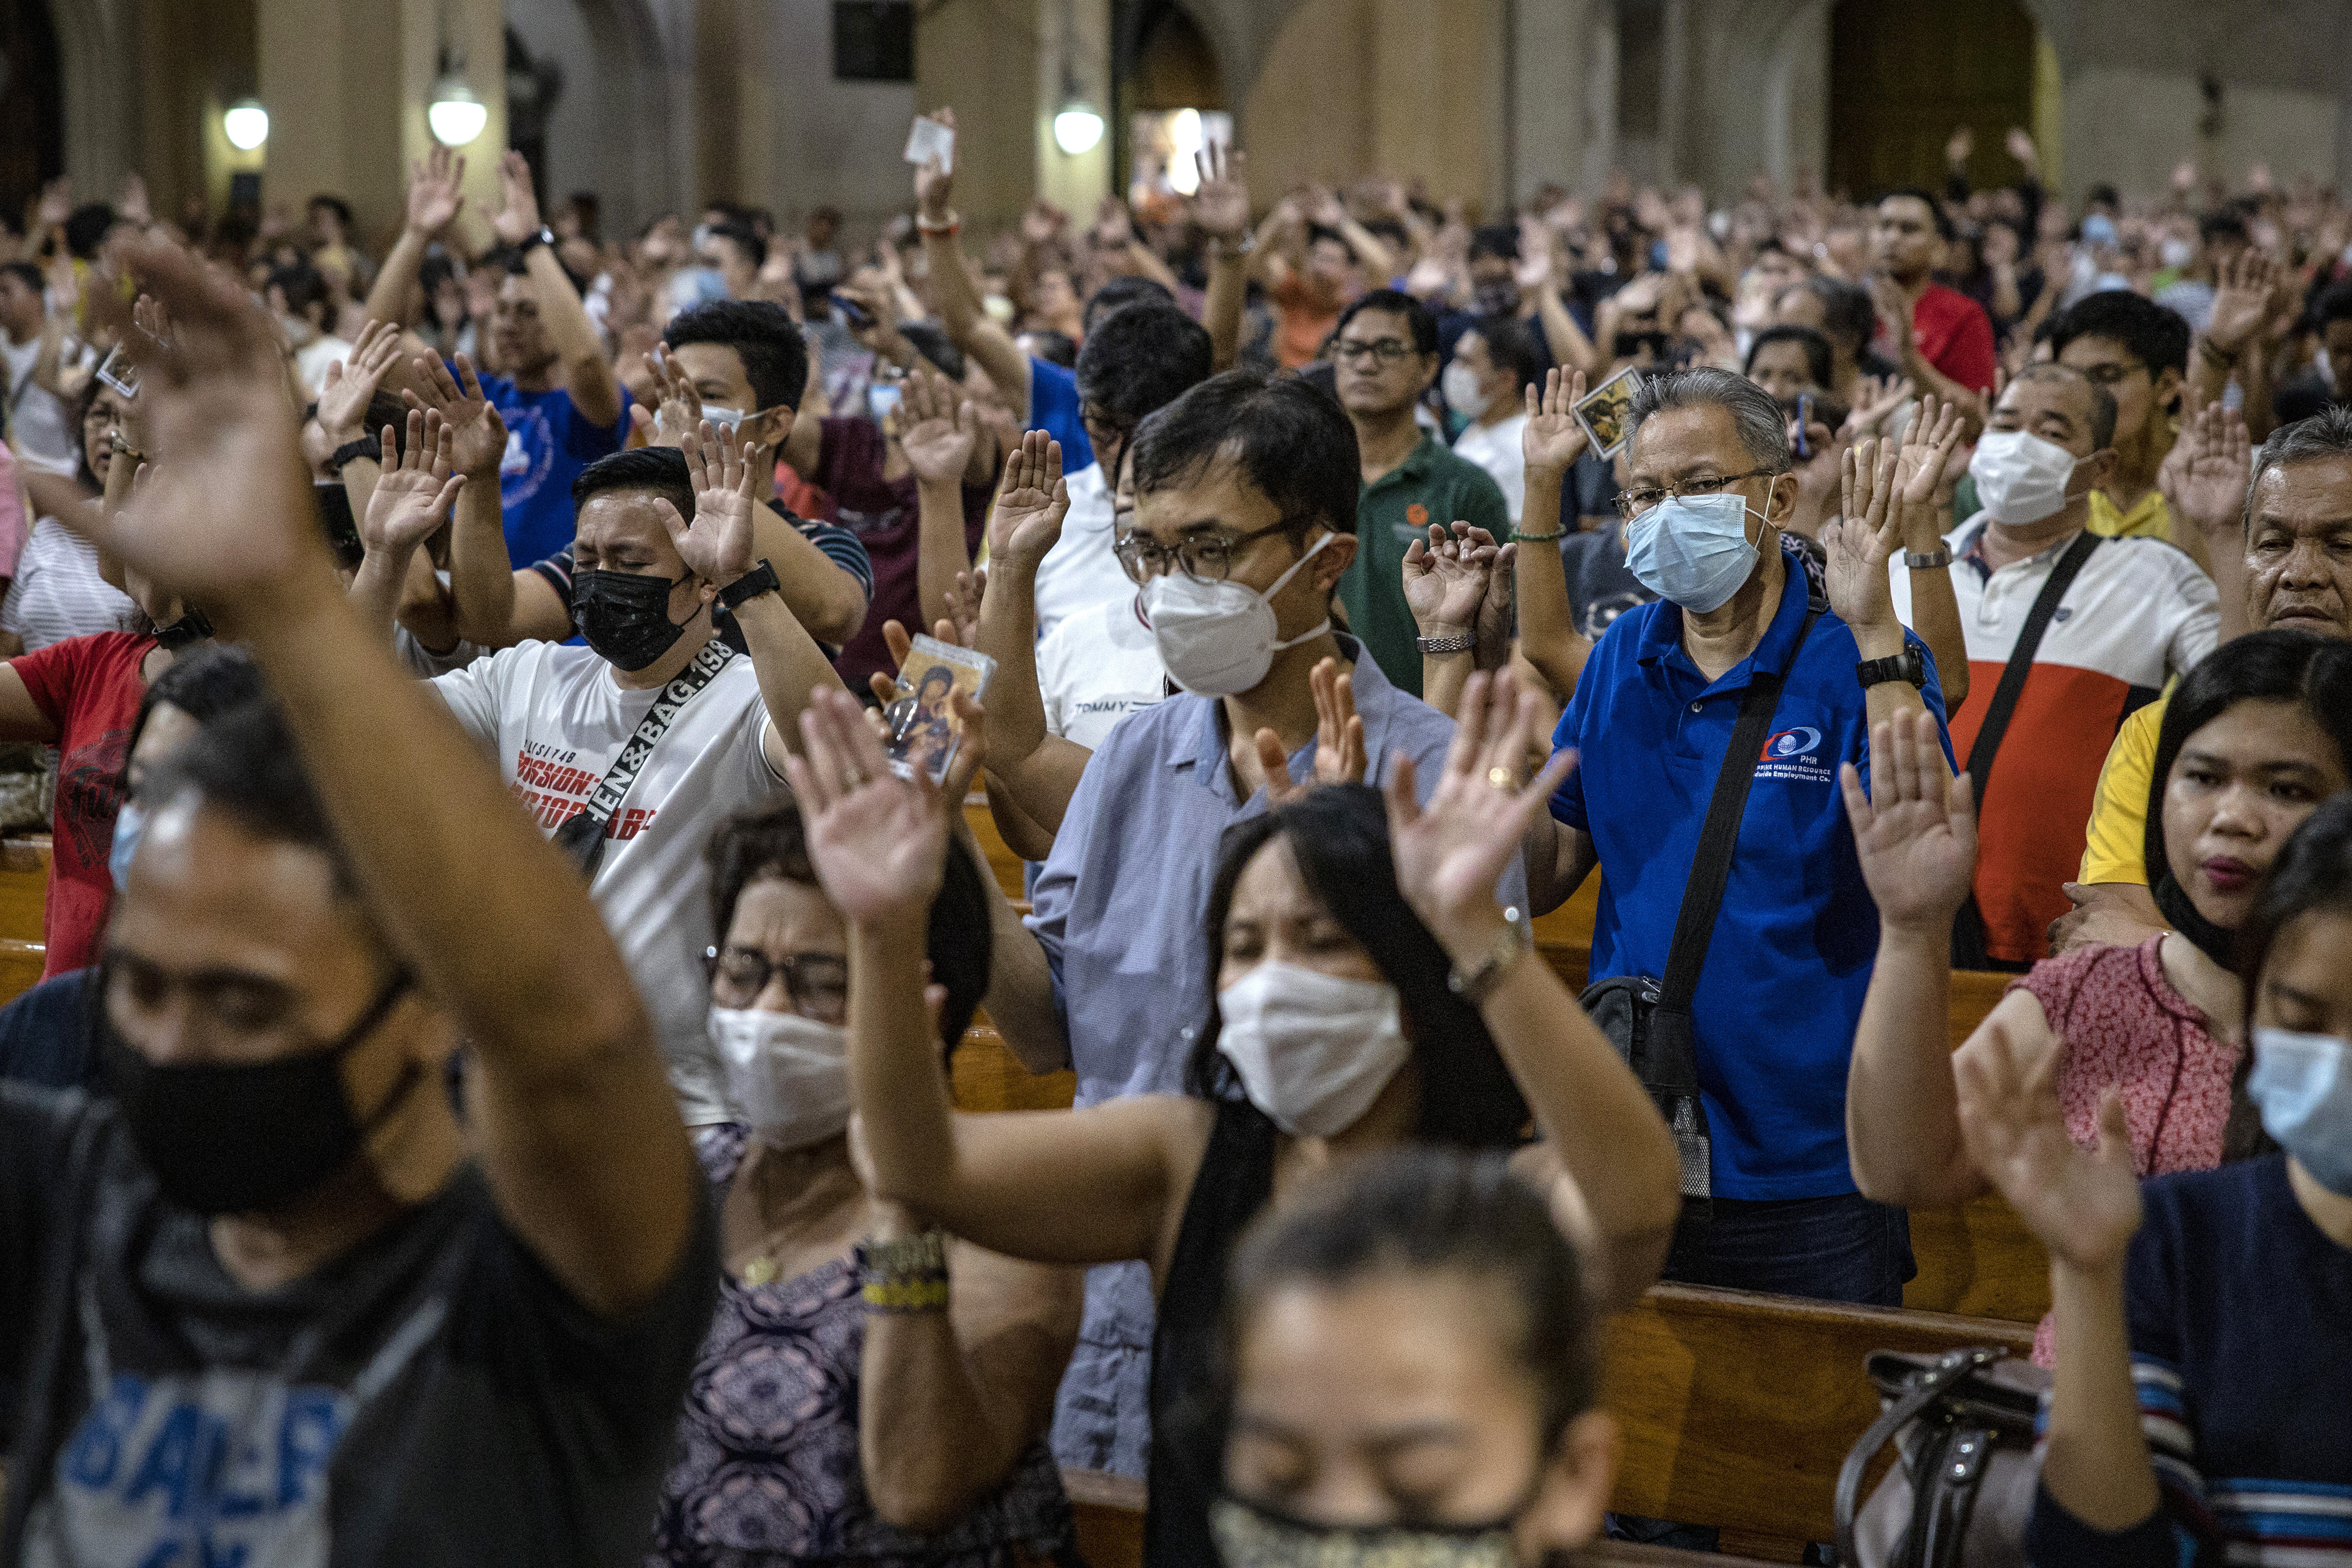 Filipinos wearing facemasks attend evening mass at a church on March 11, 2020 in Paranaque, Metro Manila, Philippines. (Ezra Acayan/Getty Images)